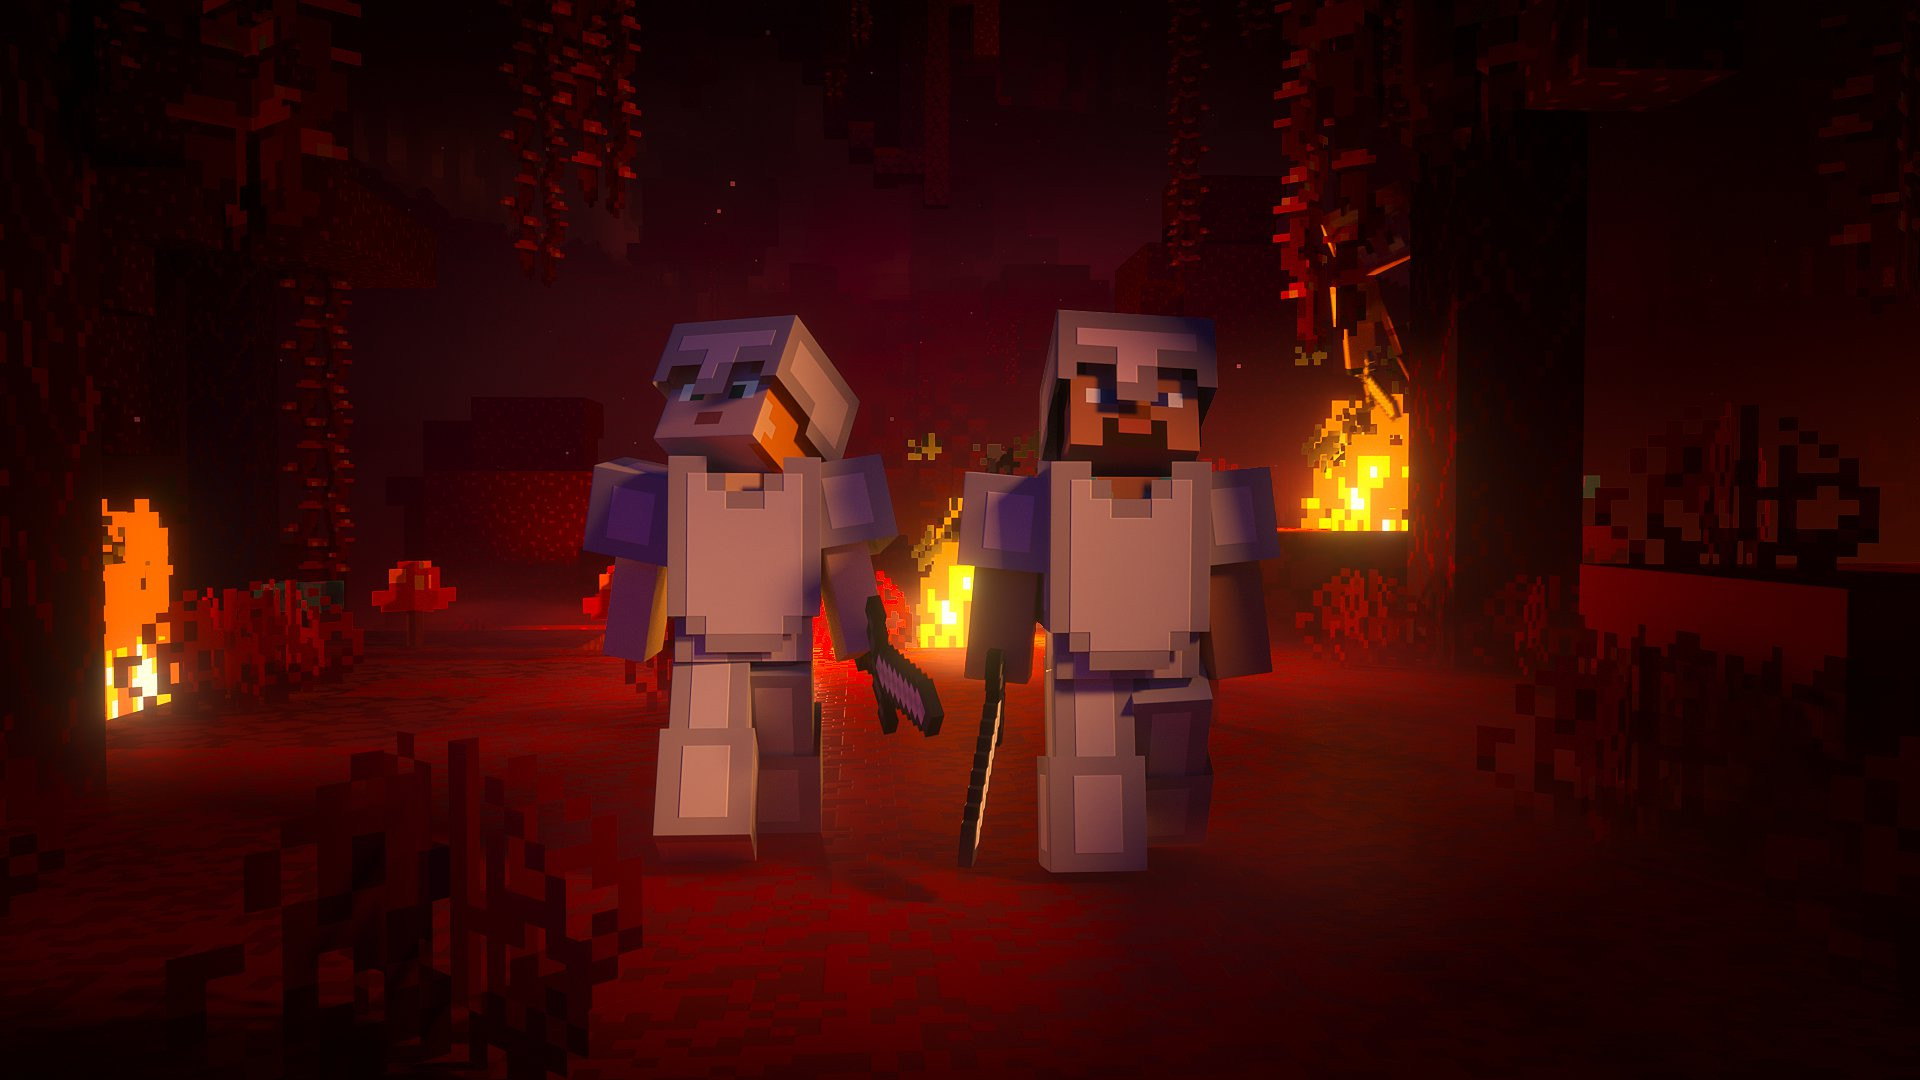 Nether Update: Official Trailer 